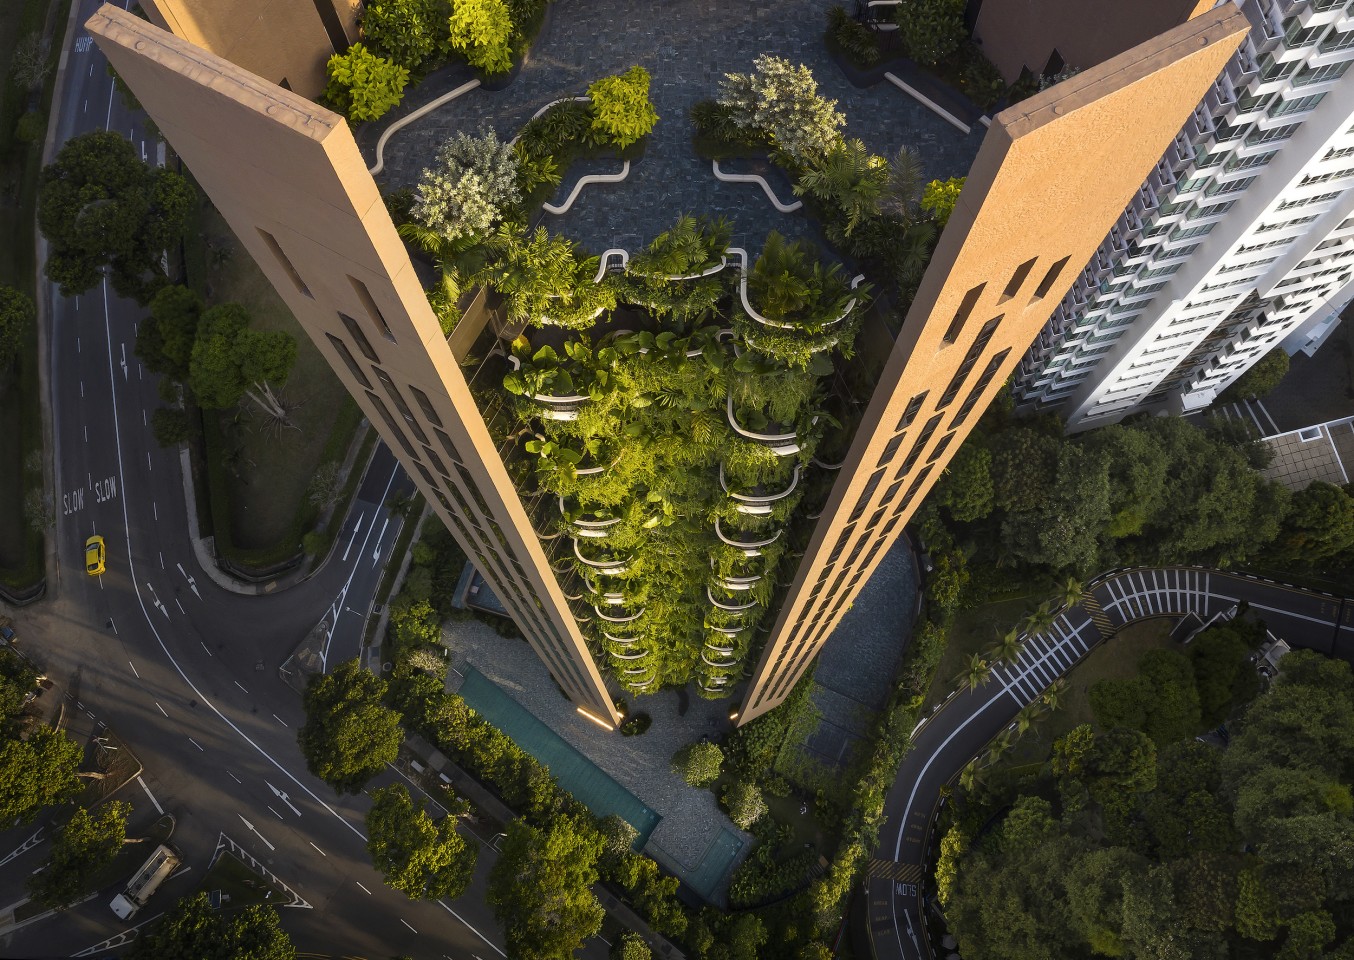 During the design process for Eden, Heatherwick Studio drew inspiration from Singapore's natural landscape